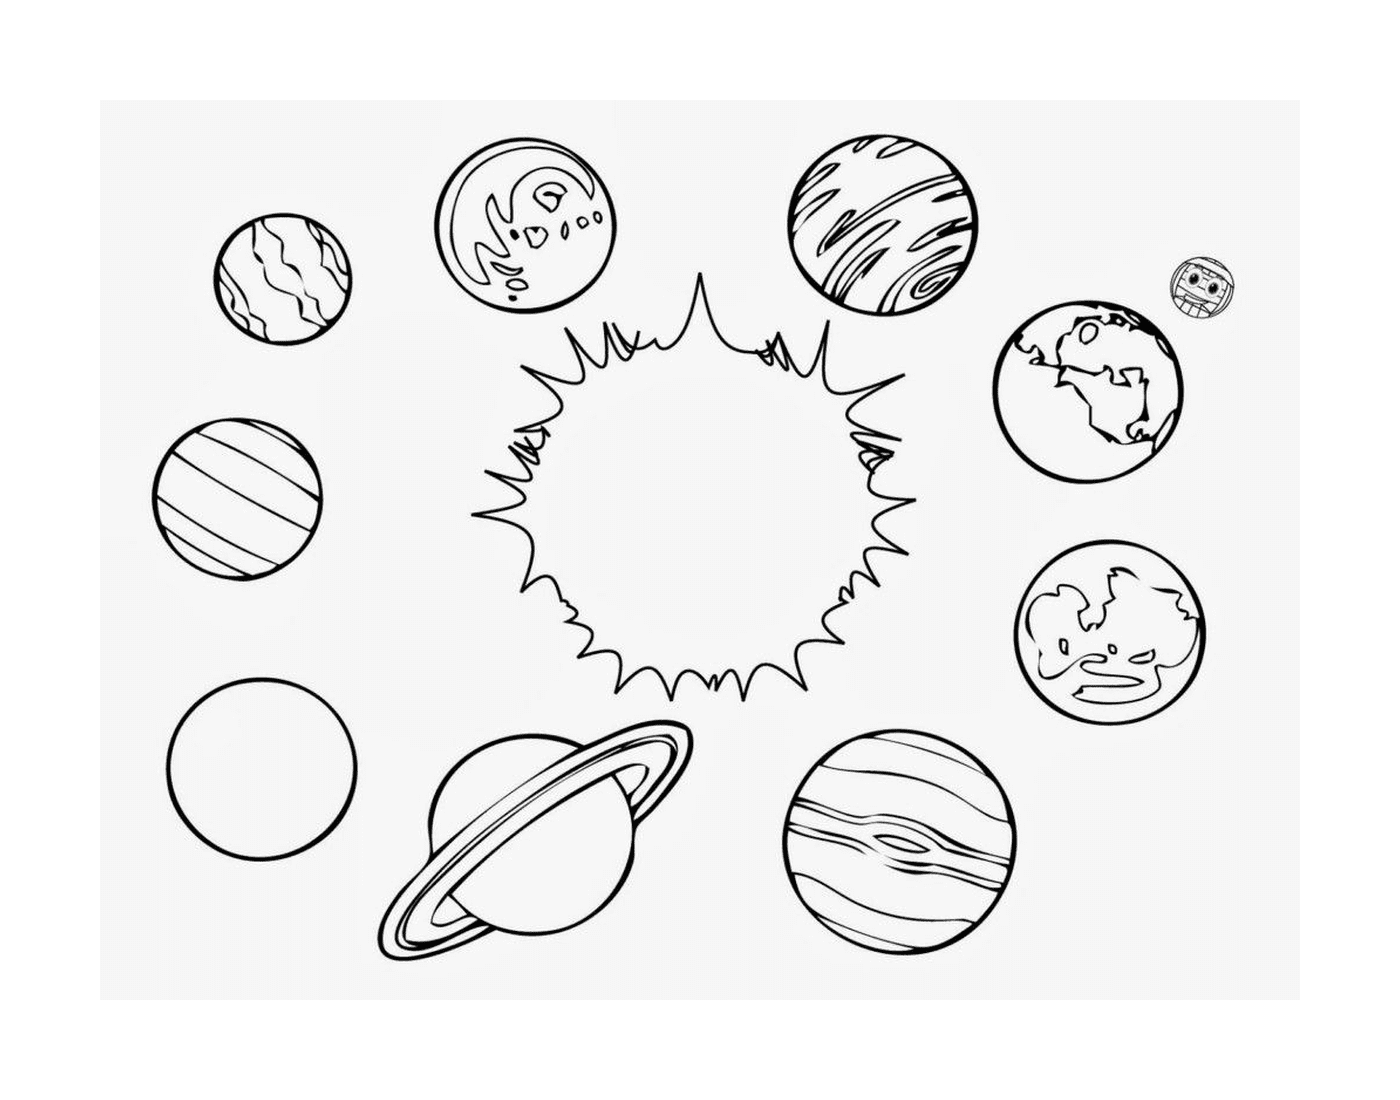  Group of planets in solar system 